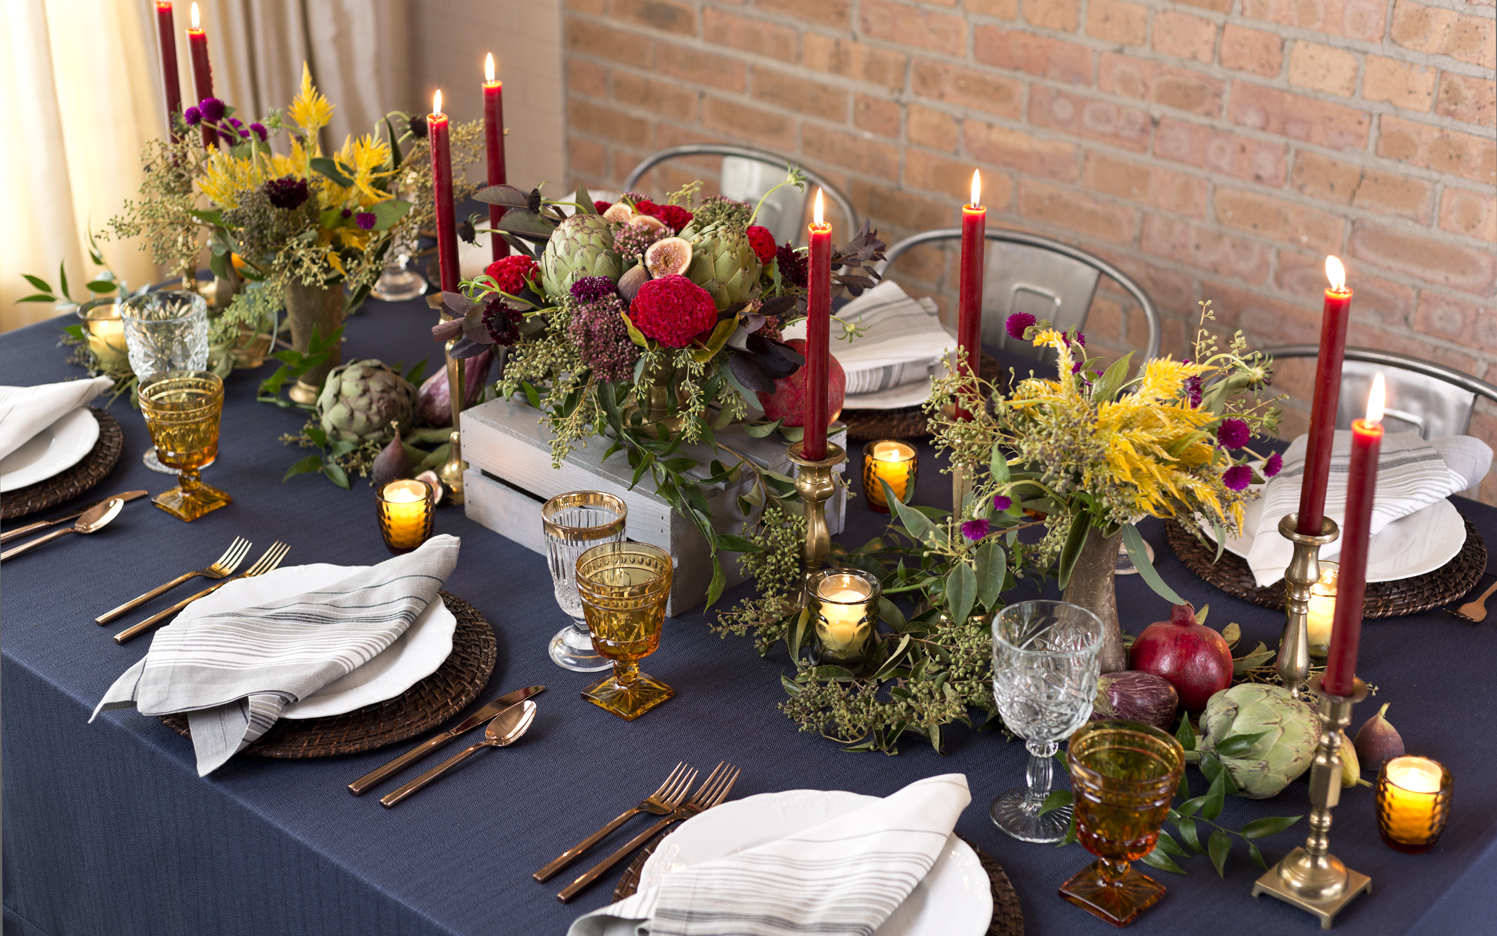 These amazing holiday tablescapes will light up your home